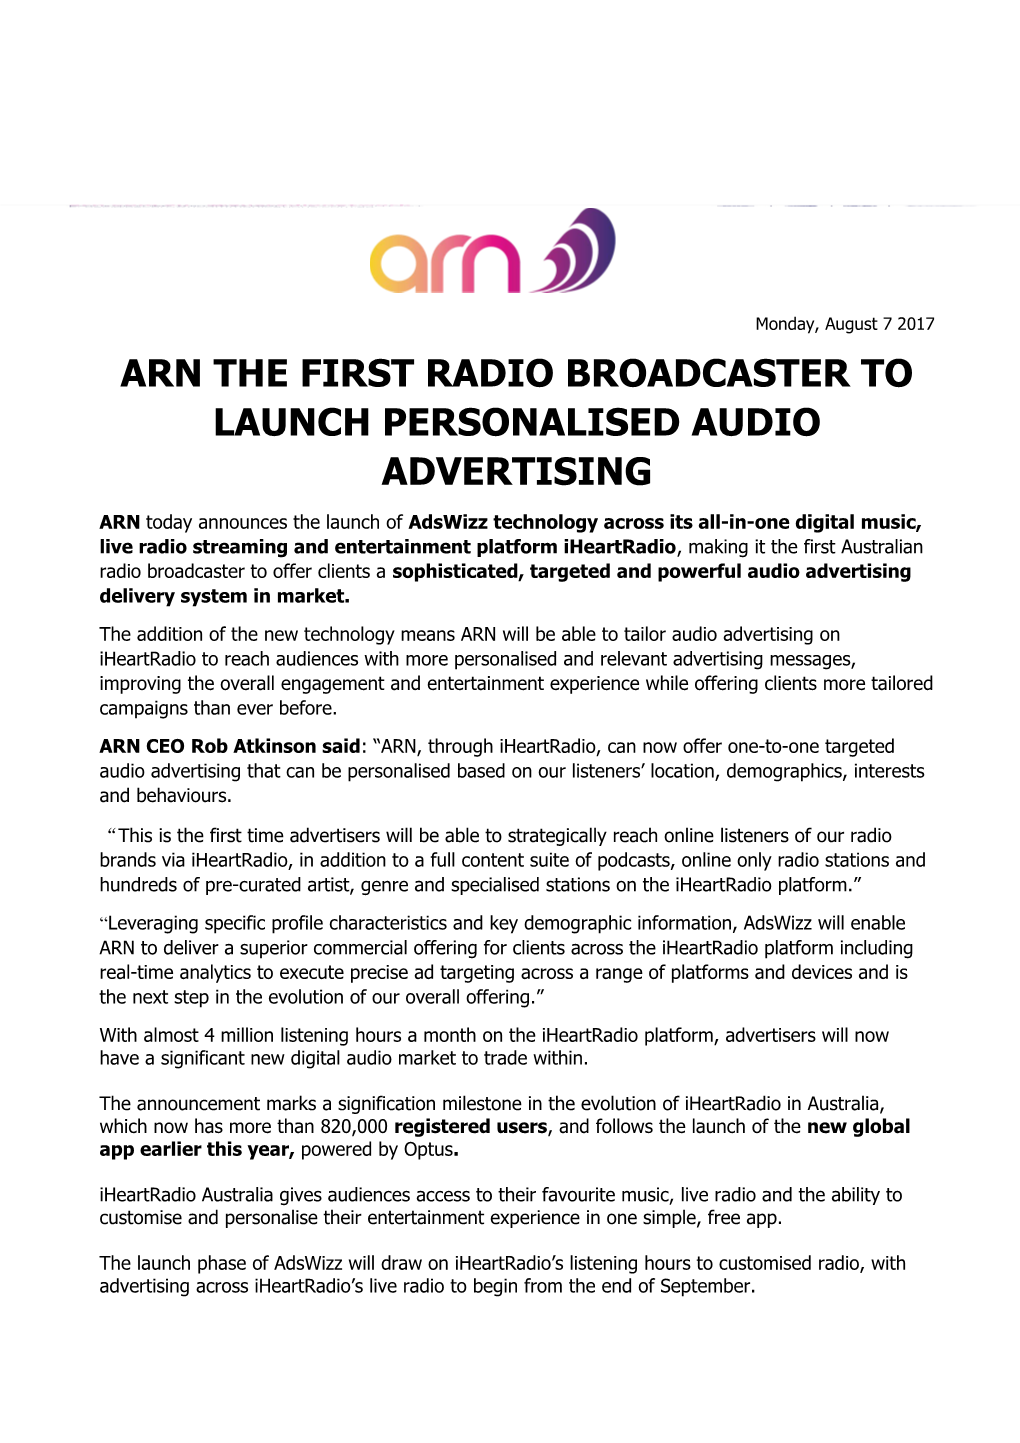 Arn the First Radio Broadcaster to Launch Personalised Audio Advertising